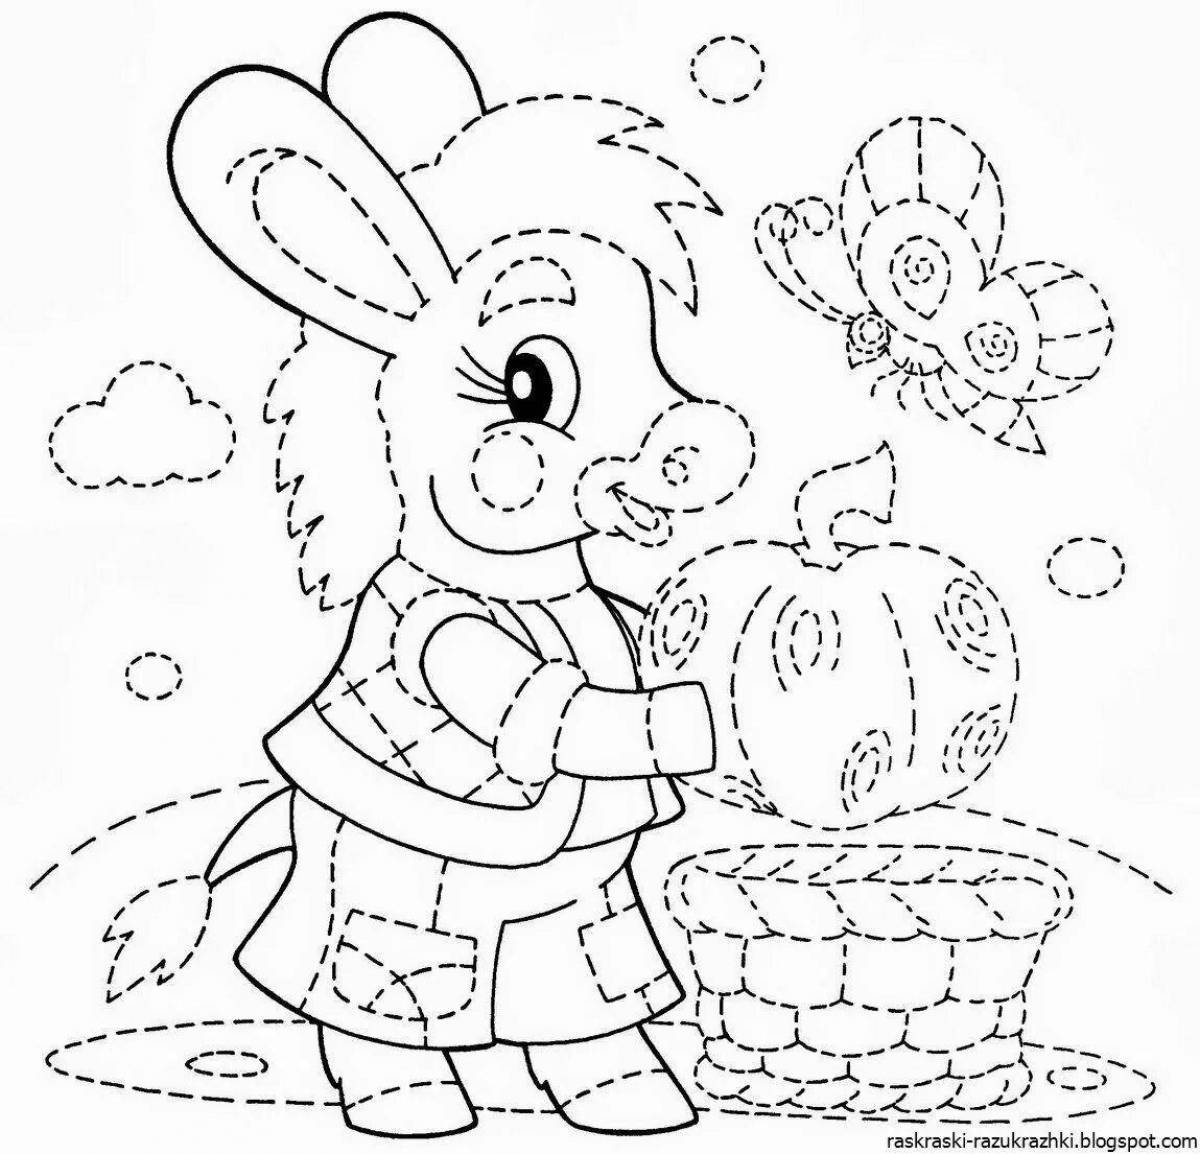 Color-frenzy coloring page для 6-летних